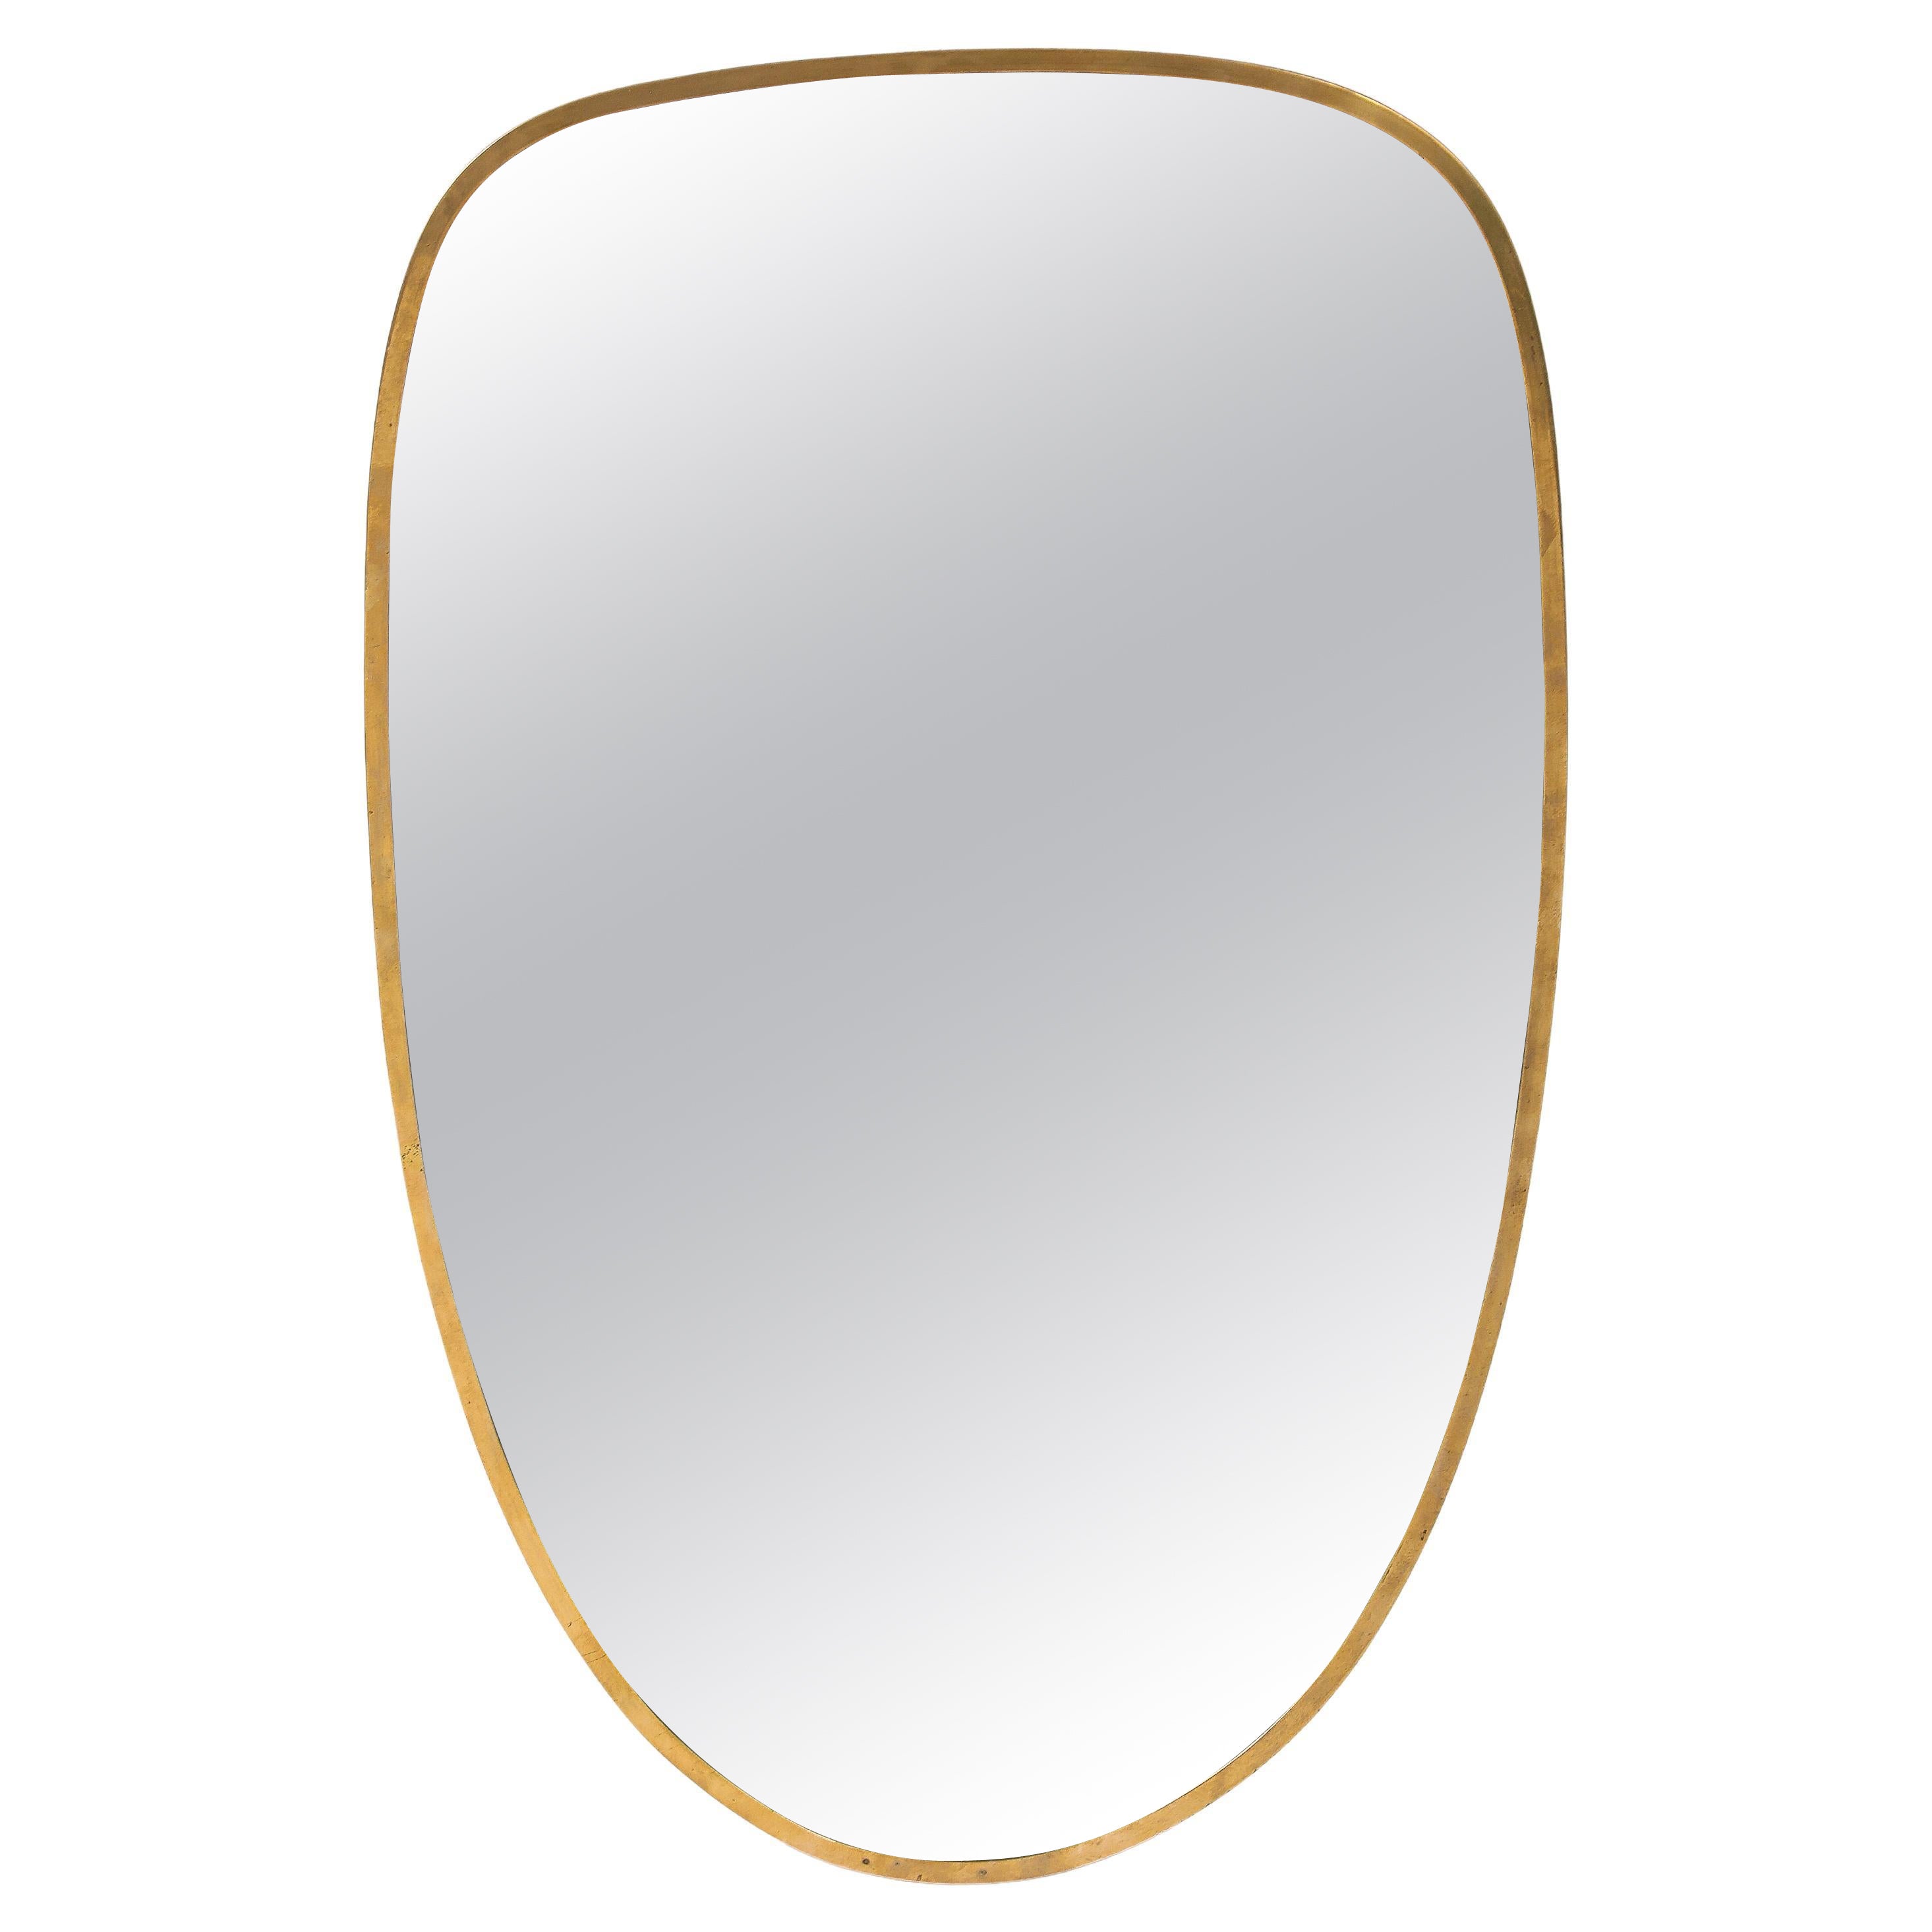 Italian Modernist Mirror with Brass Frame, Italy, c. 1950 For Sale